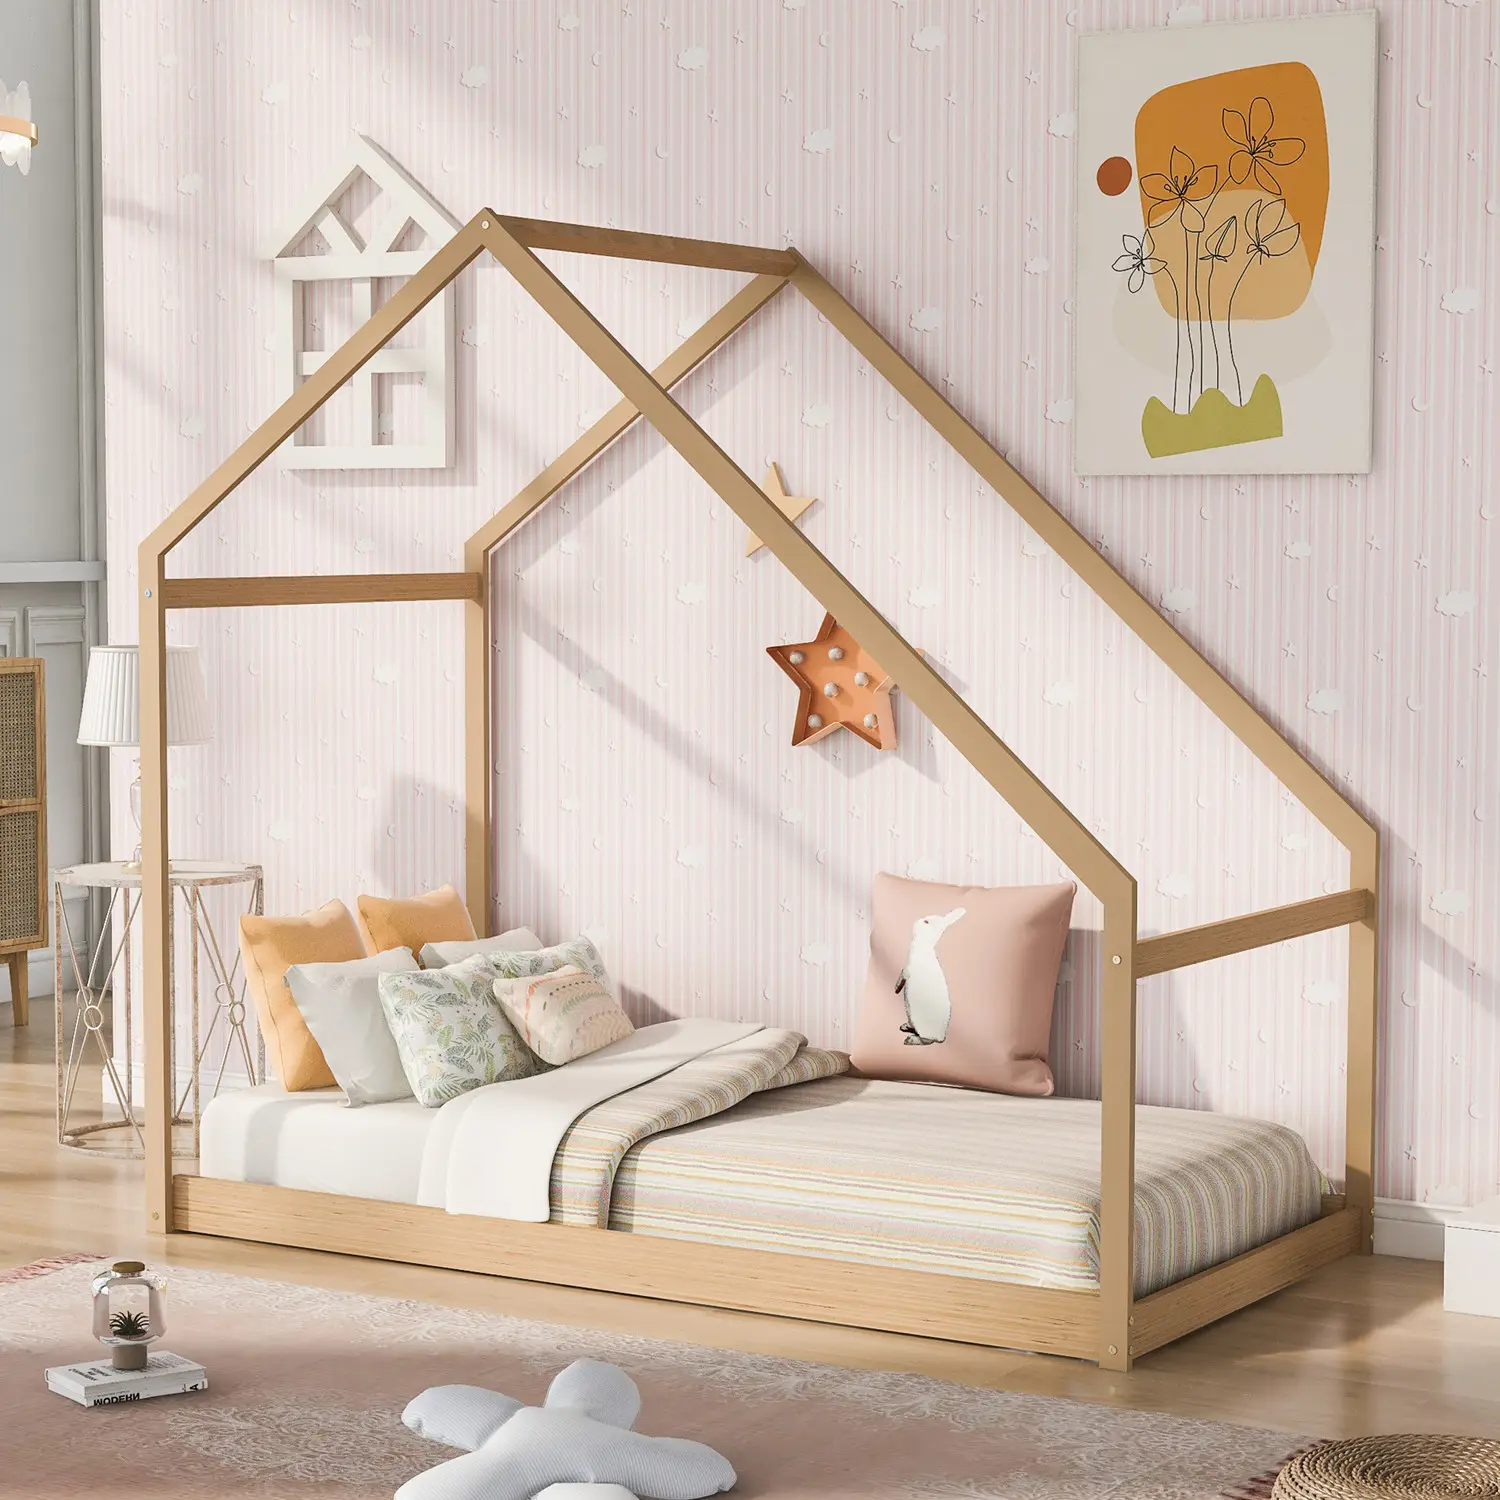 Solid Pine Wood Montessori Wooden Kids Playing Game House Baby Toddler Floor Bed